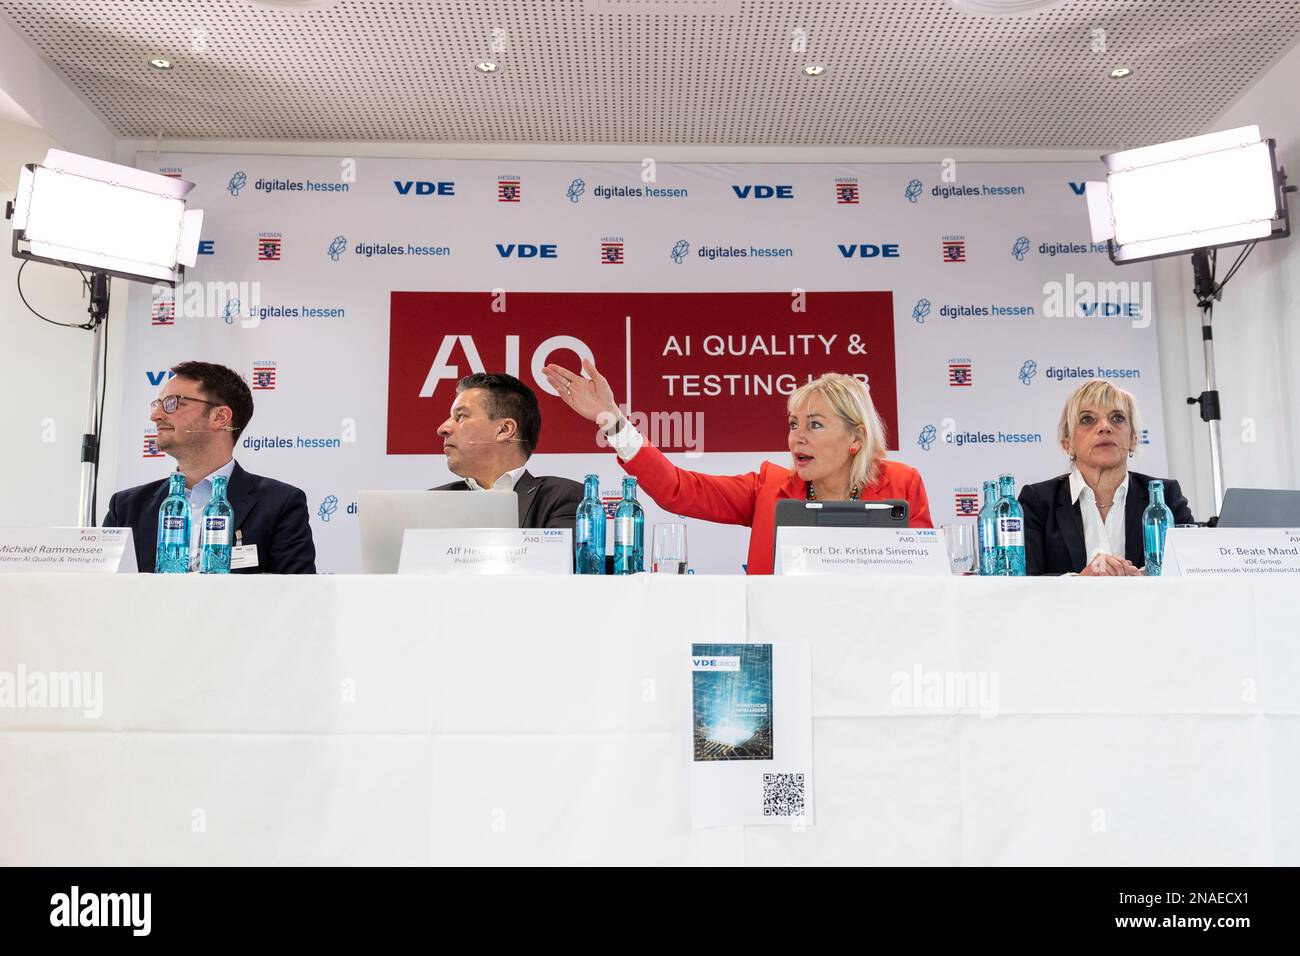 13 February 2023, Hesse, Frankfurt/Main: Kristina Sinemus (CDU, 2nd from right), Digital Minister of Hesse, speaks at the press conference alongside Michael Rammensee (l), Managing Director AI Quality & Testing Hub, Alf Henryk Wulf (2nd from left), President Verband der Elektrotechnik Elektronik Informationstechnik (VDE), and Beate Mand (r), Deputy Chairwoman VDE. To promote the quality of AI systems and make it verifiable, the state of Hesse and the VDE have launched an initiative. The aim is to strengthen the 'AI made in Hessen' brand. Photo: Hannes P. Albert/dpa Stock Photo